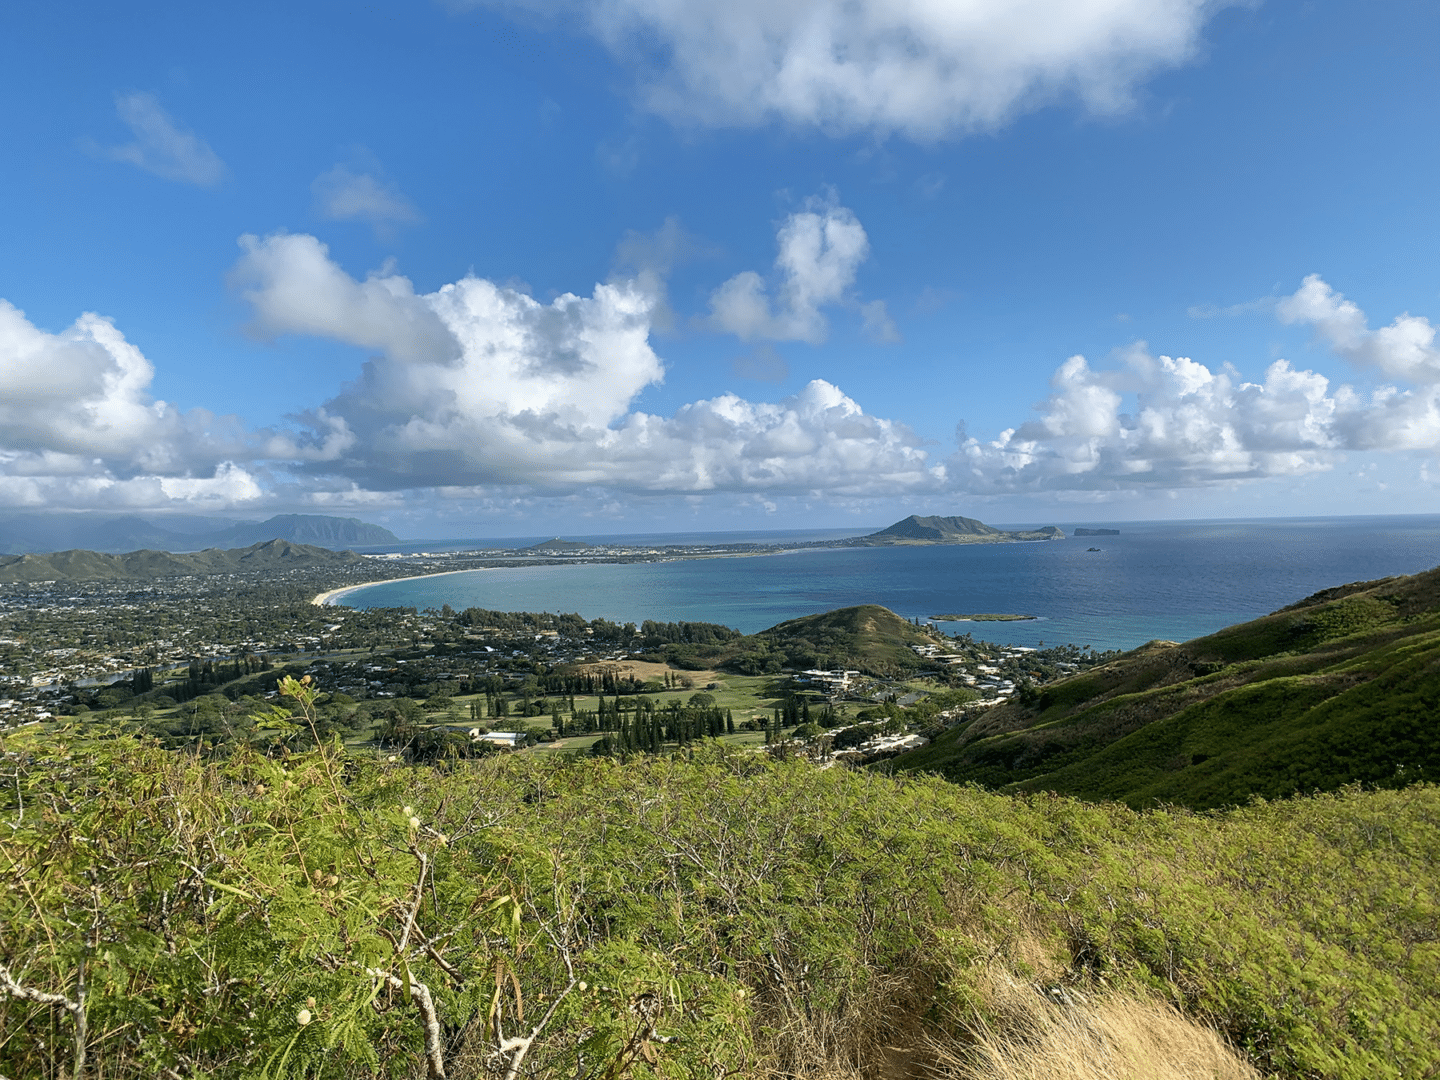 Hiking Oahu: Best trails, by travel blogger What The Fab